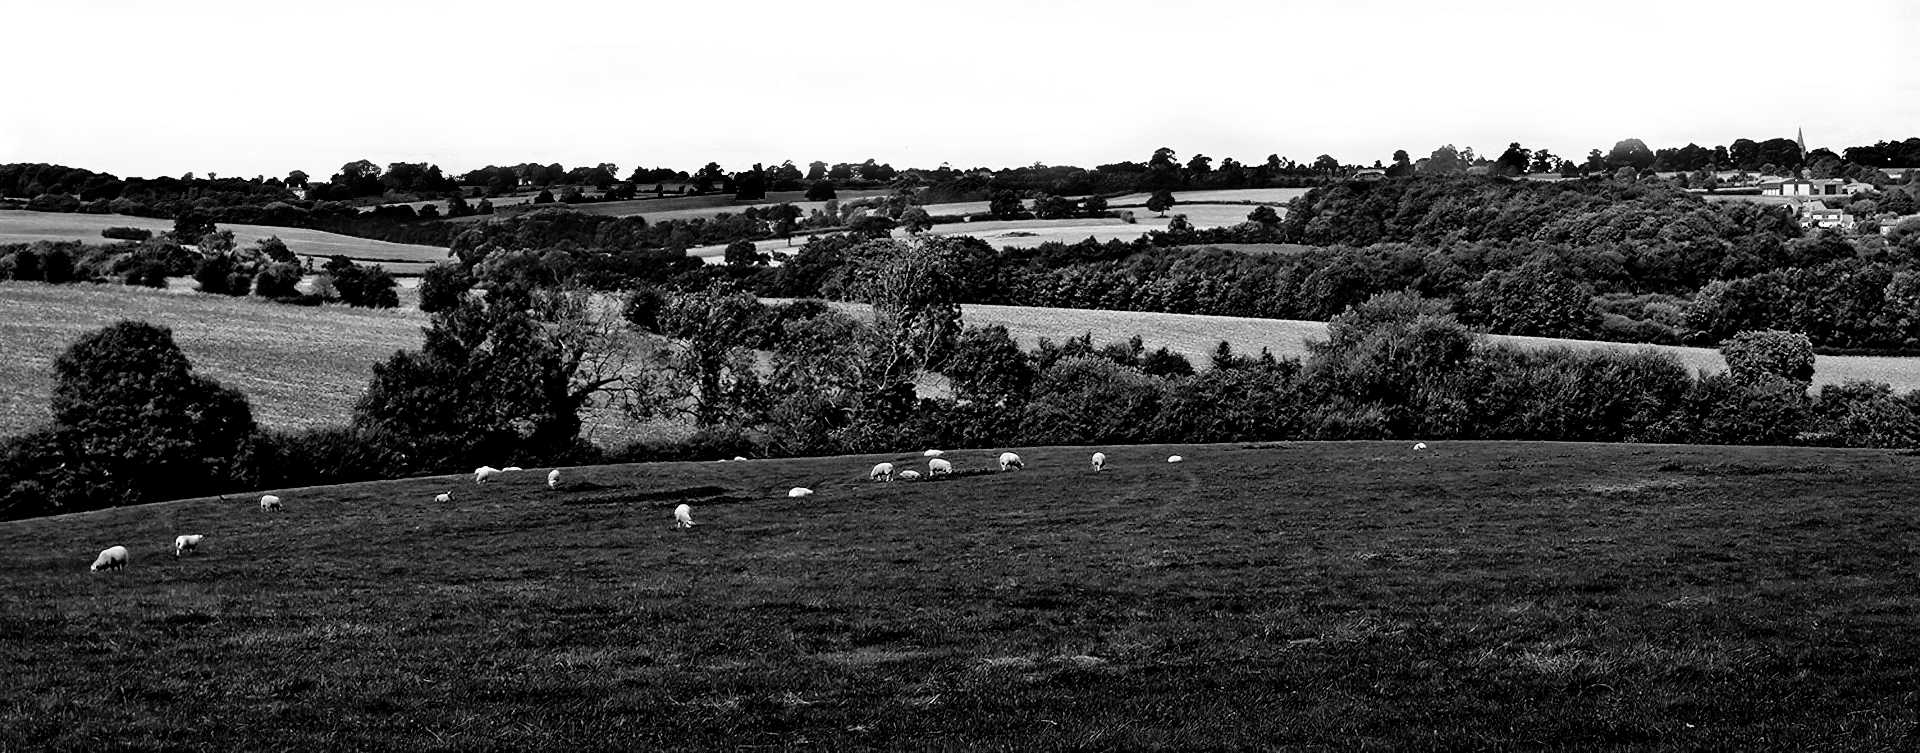 Sheep grazing in the countryside of Warmington, Northamptonshire